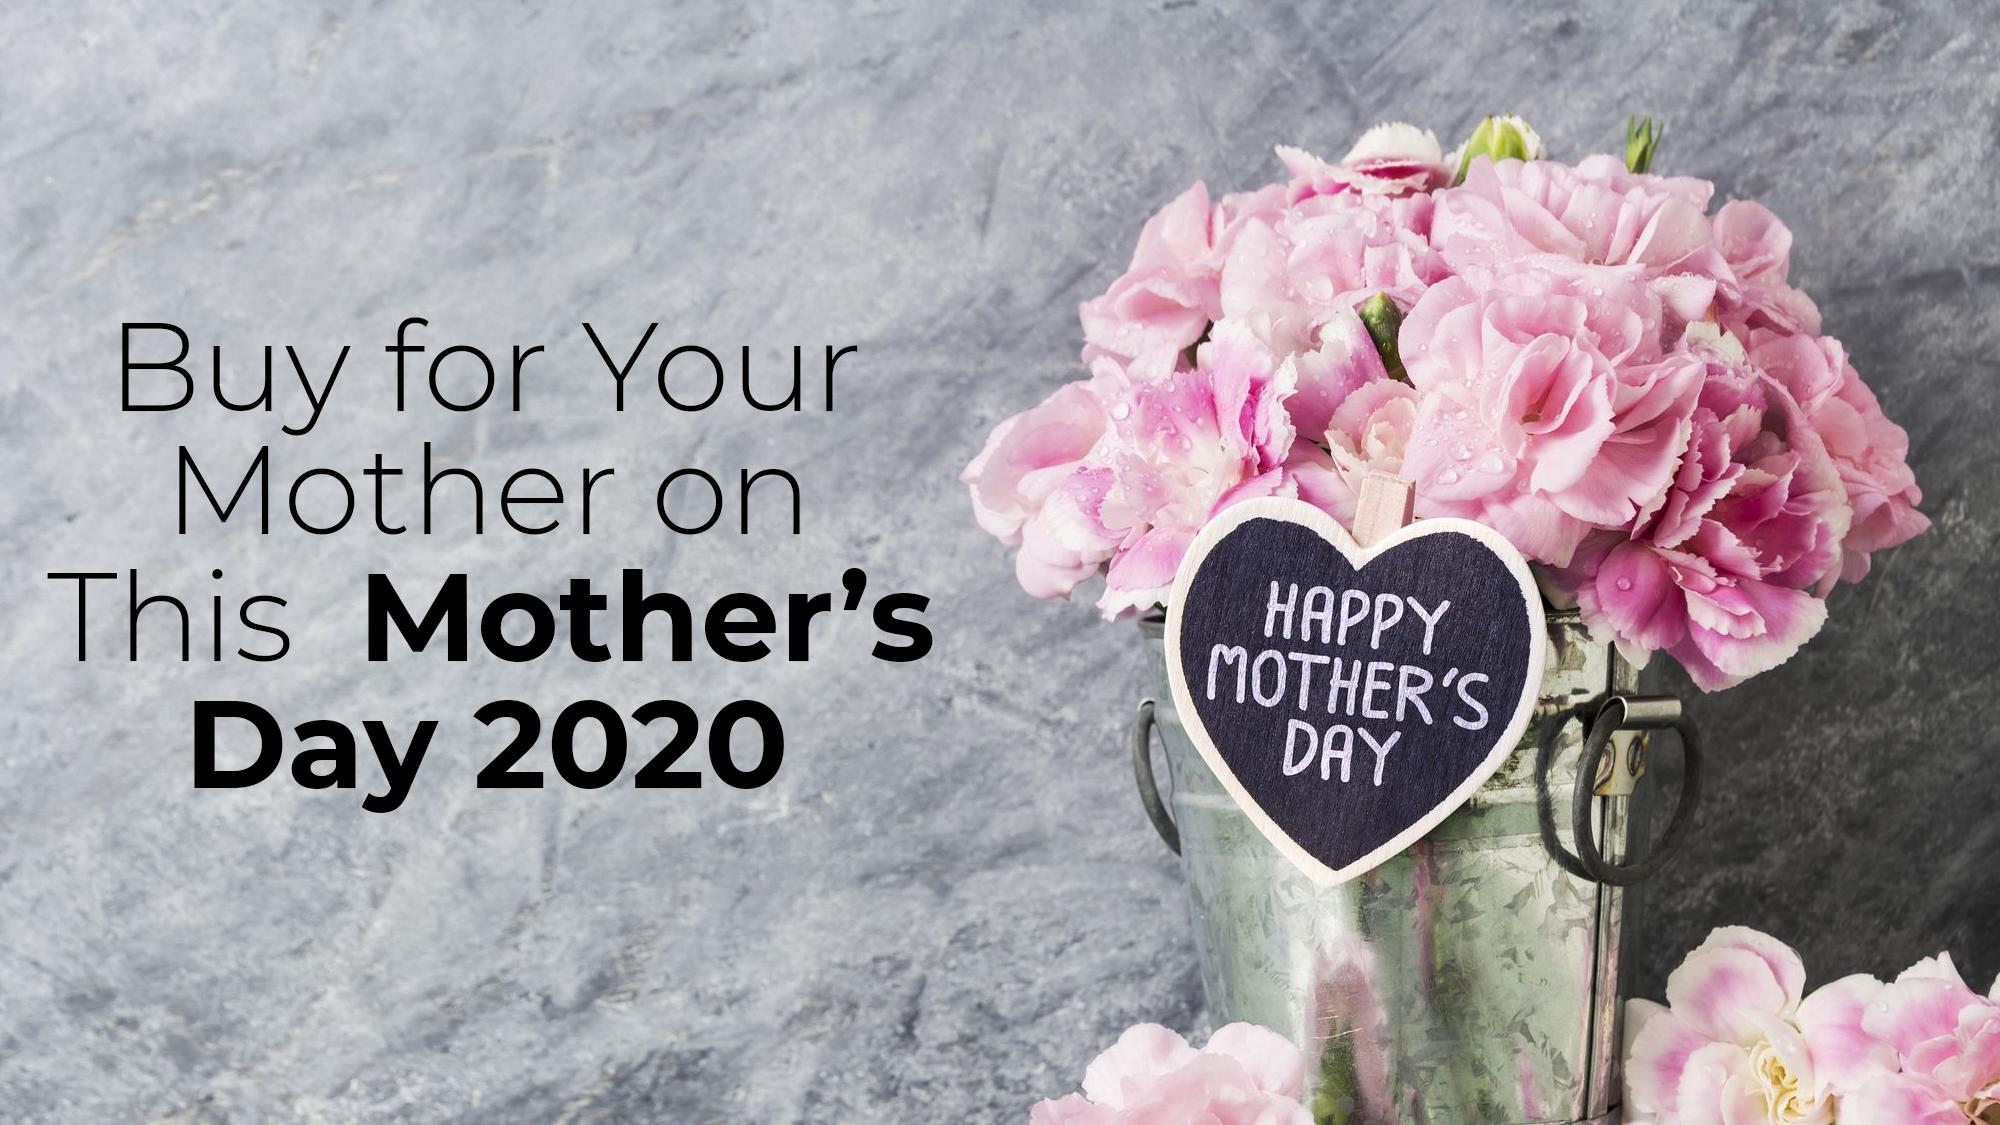 Buy For Your Mother on This Mother's day 2020